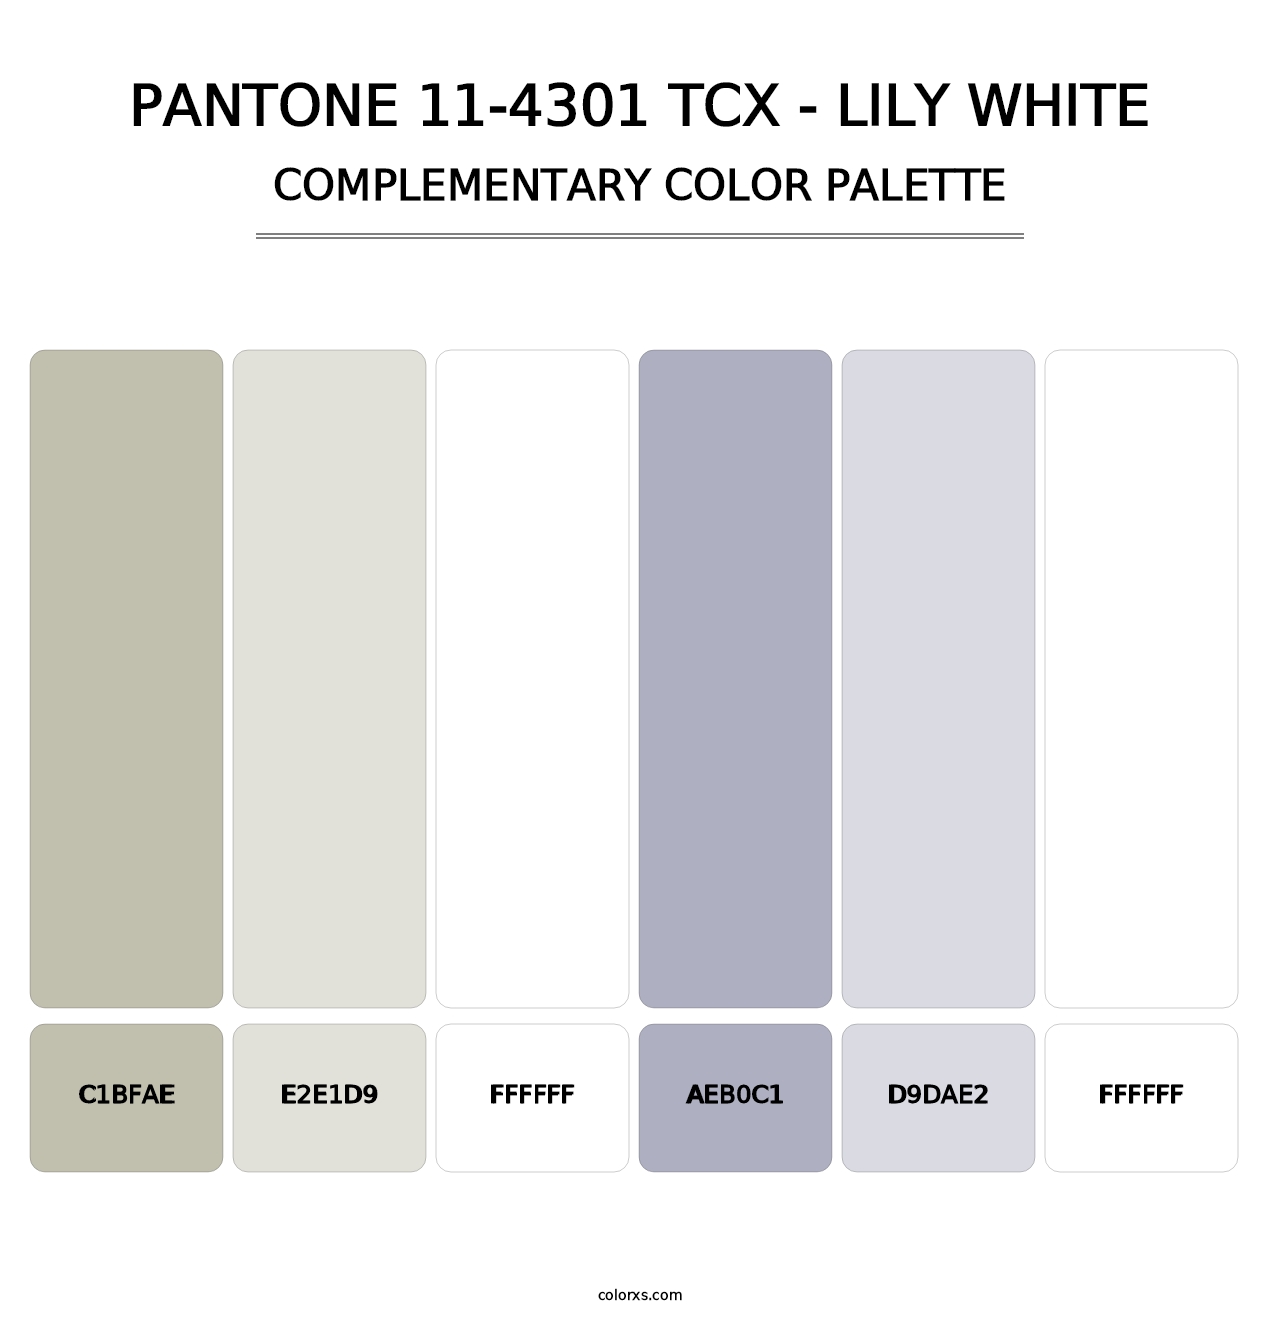 PANTONE 11-4301 TCX - Lily White - Complementary Color Palette